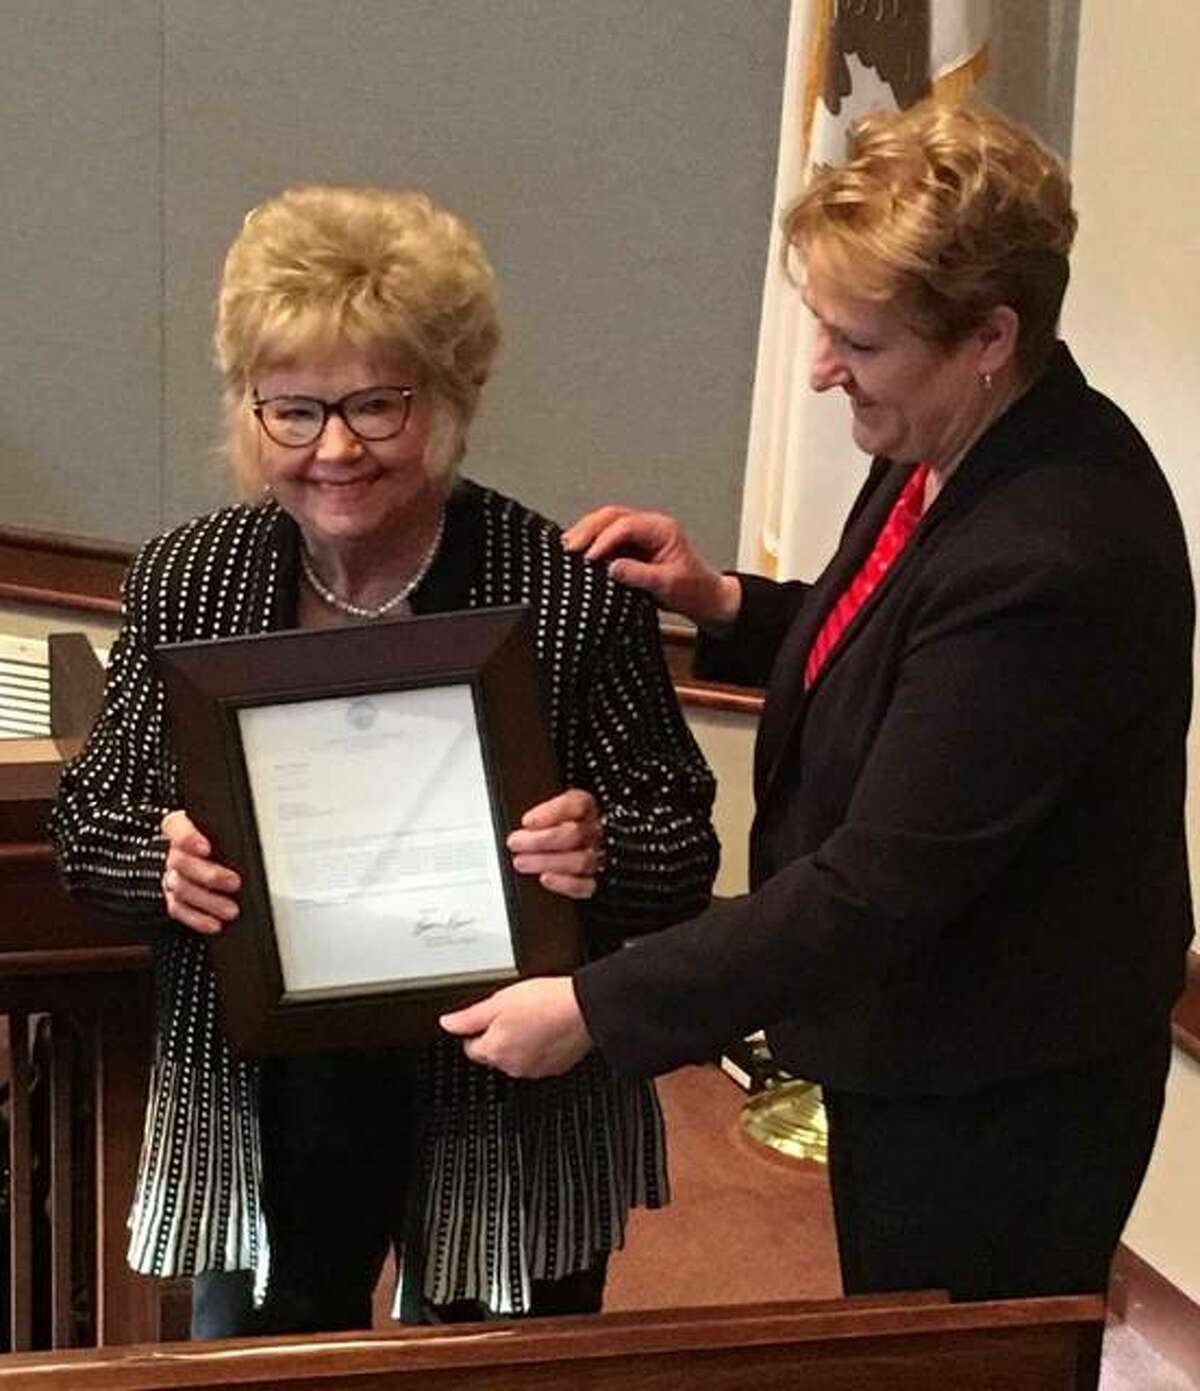 Director of the Illinois Department of Aging Jean Bohnhoff presents Madison County Board member Helen Hawkins, of Granite City, with a letter of recognition by Gov. Bruce Rauner during her induction into the Illinois Senior Hall of Fame this past February.